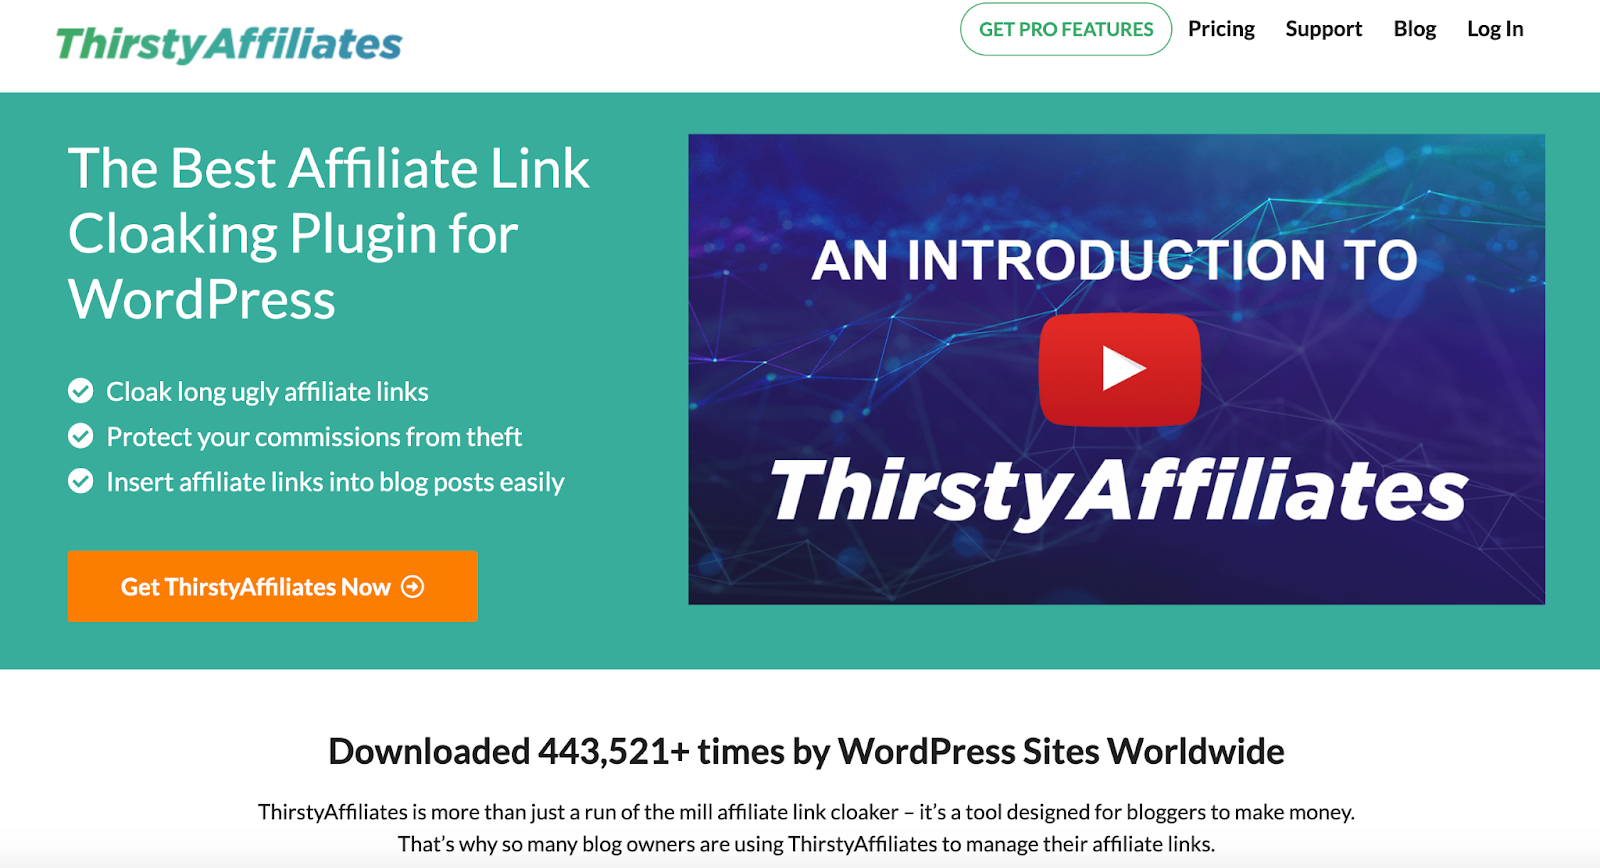 A screenshot of the Thirsty Affiliates homepage featuring a video introduction and list of product benefits